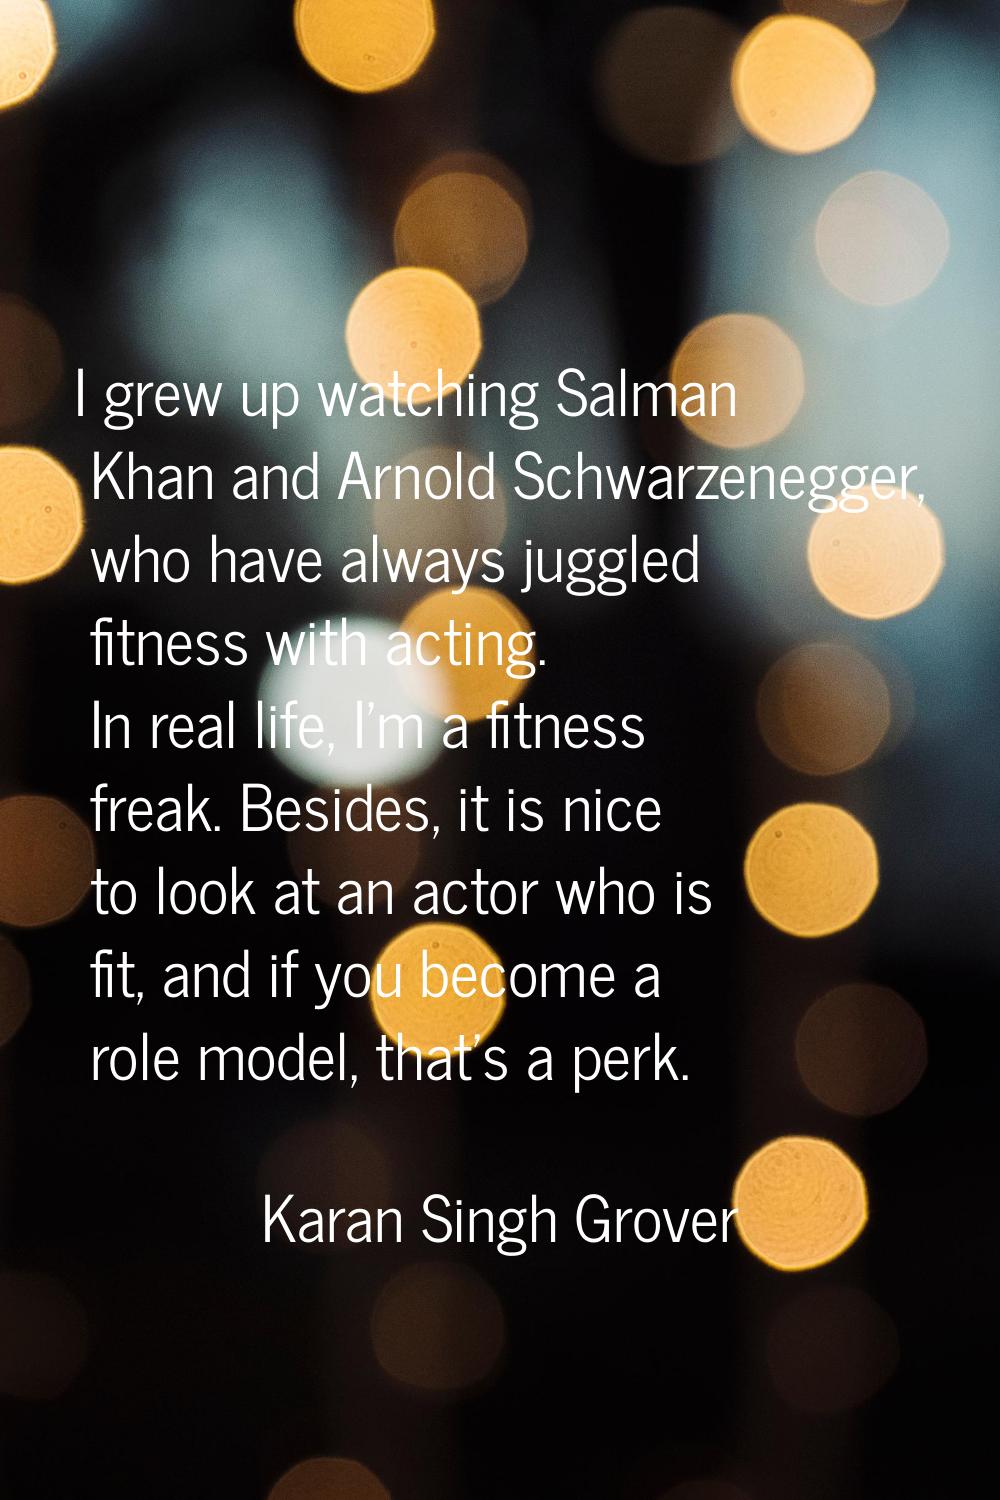 I grew up watching Salman Khan and Arnold Schwarzenegger, who have always juggled fitness with acti